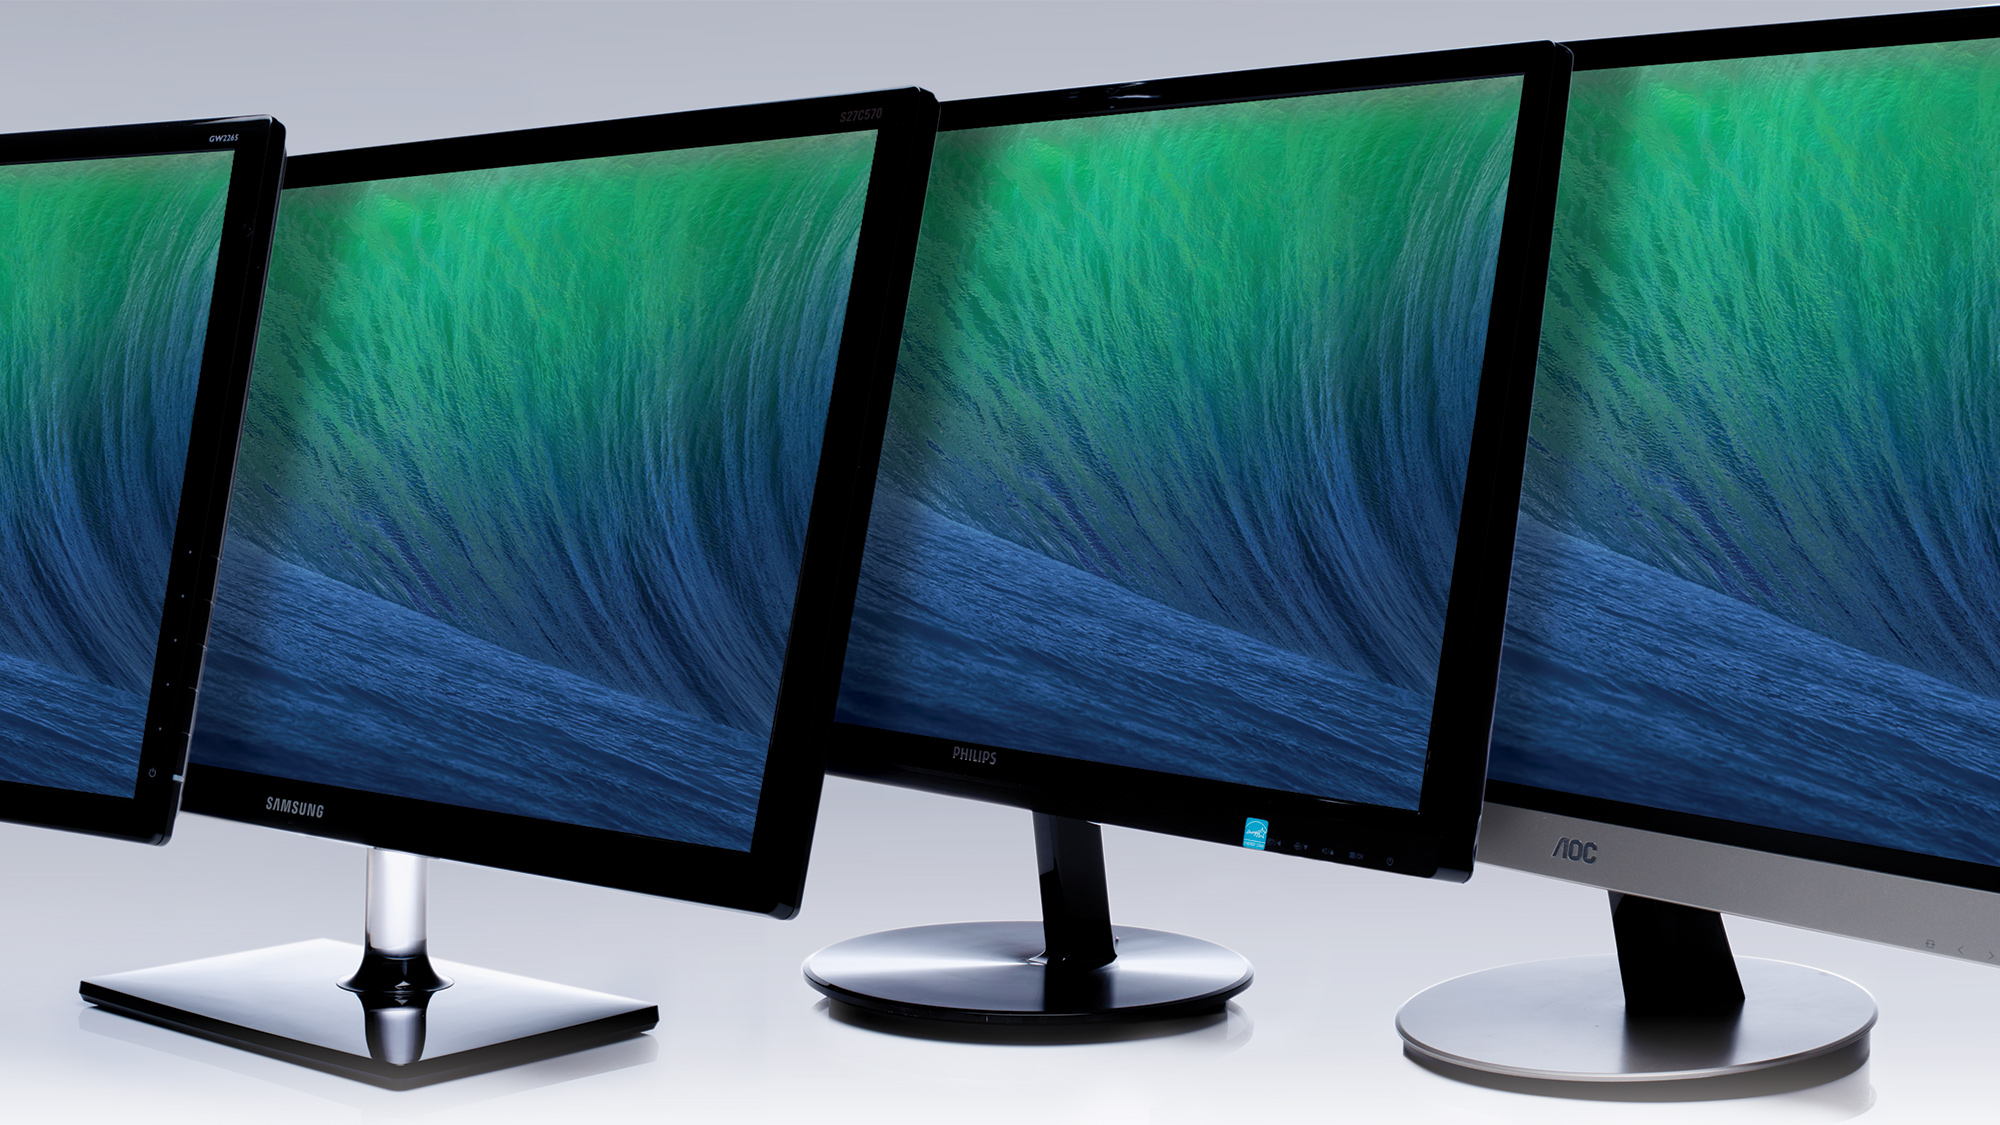 Best monitor 2021: the top 10 monitors and displays we’ve reviewed